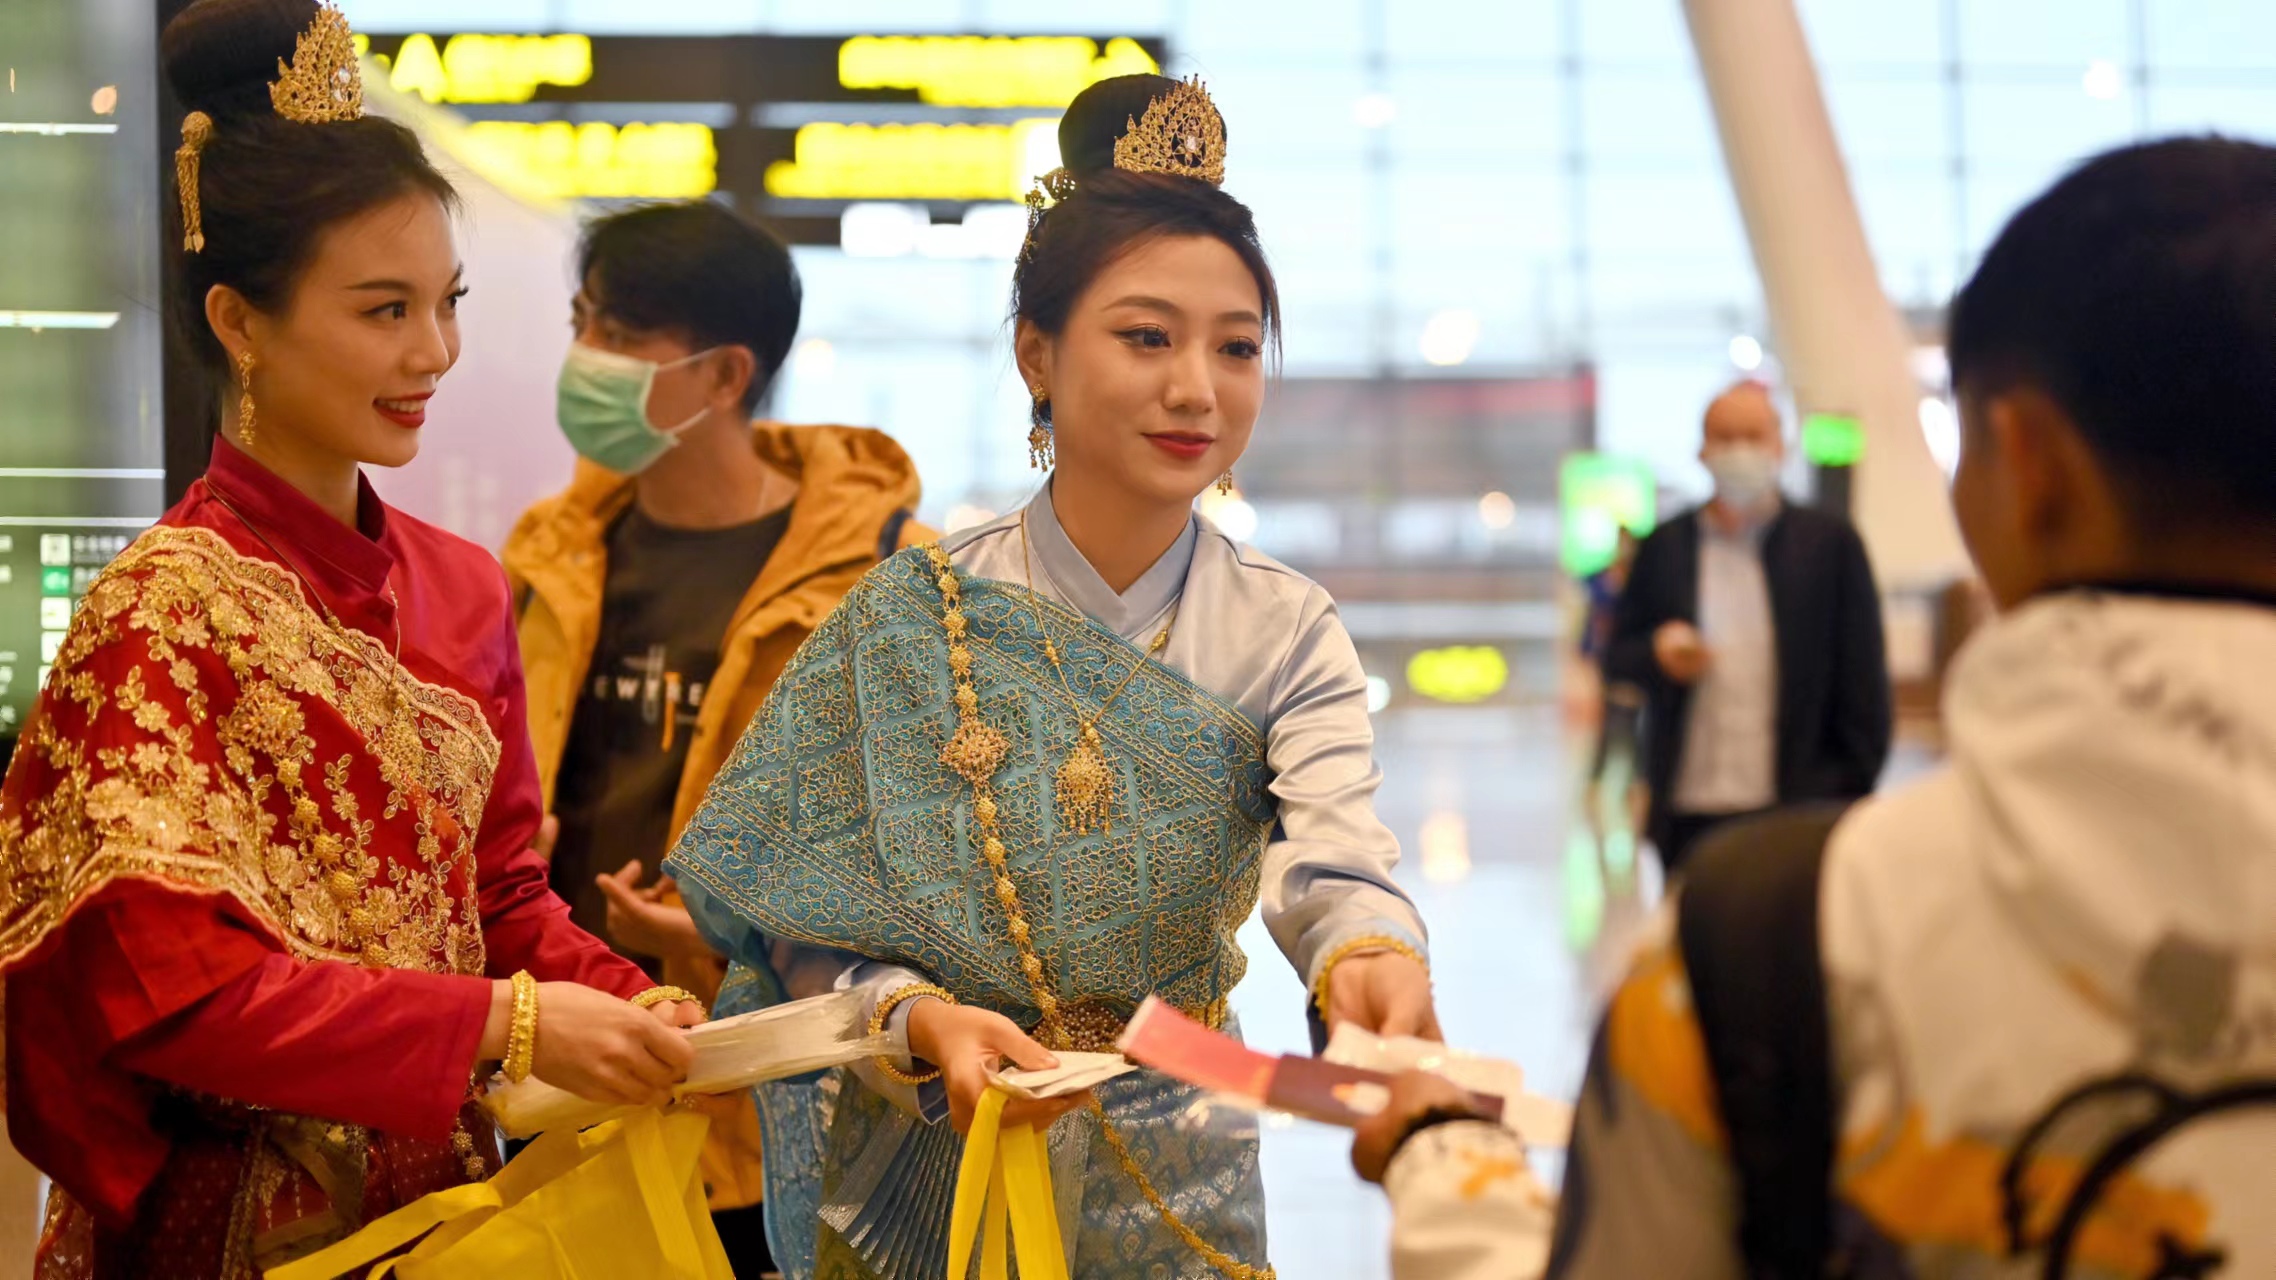 Staff dressed in Thai costumes present souvenirs to the first group of tourists to Thailand in Nanning, capital of Guangxi Zhuang Autonomous Region, China, February 6, 2023. /CFP